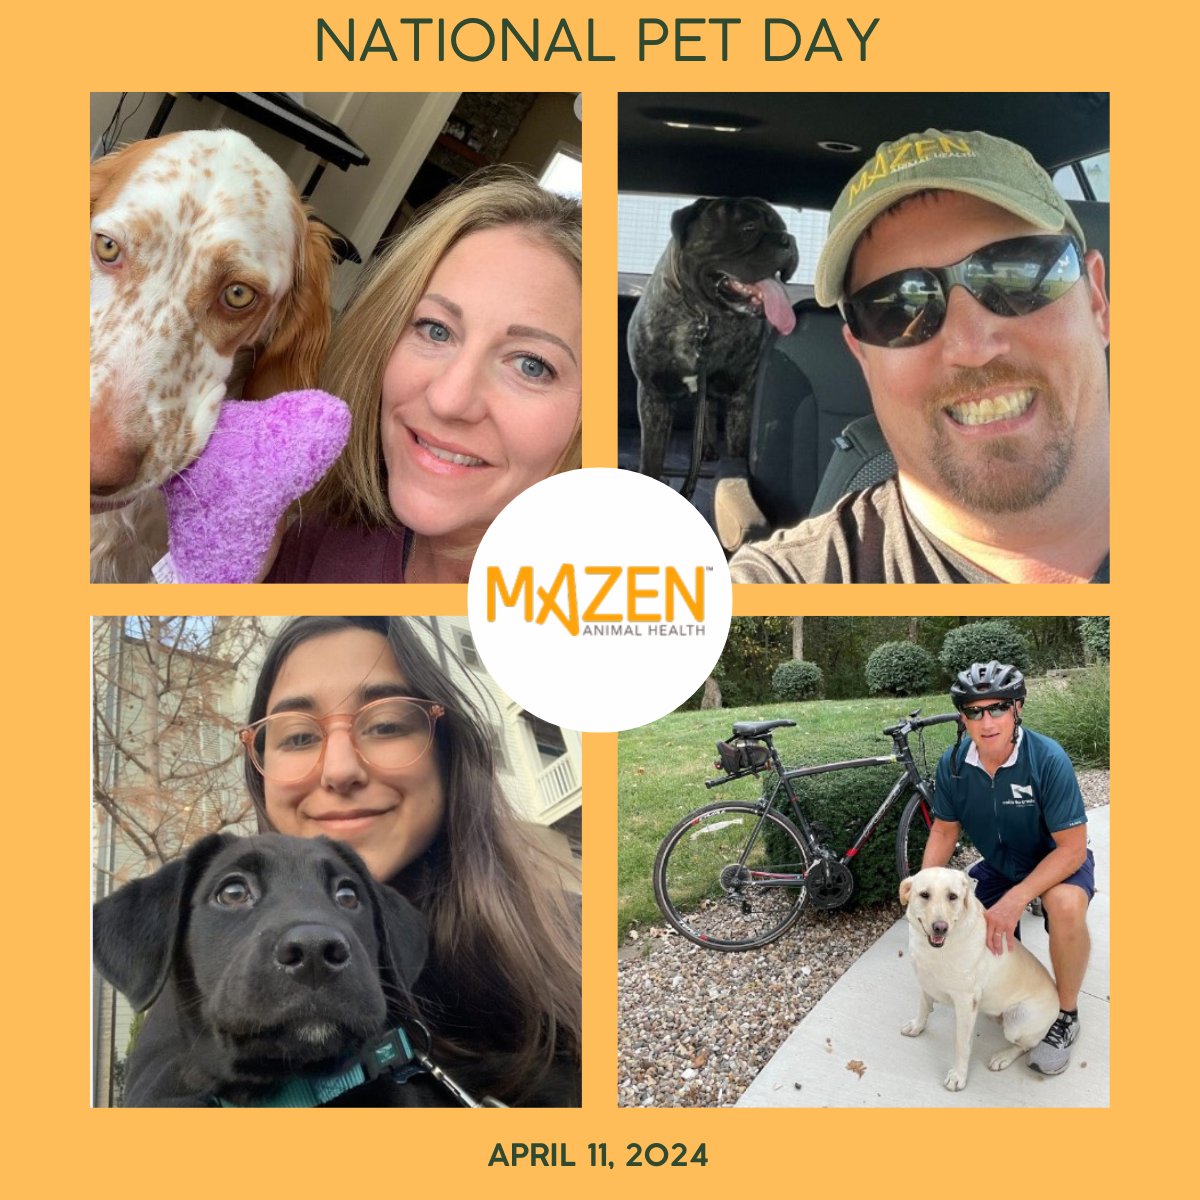 To celebrate National Pet Day, here is a small sampling of the beloved pets of Mazen! 🐶

@MazenAnimal #NationalPetDay2024 #animalhealth